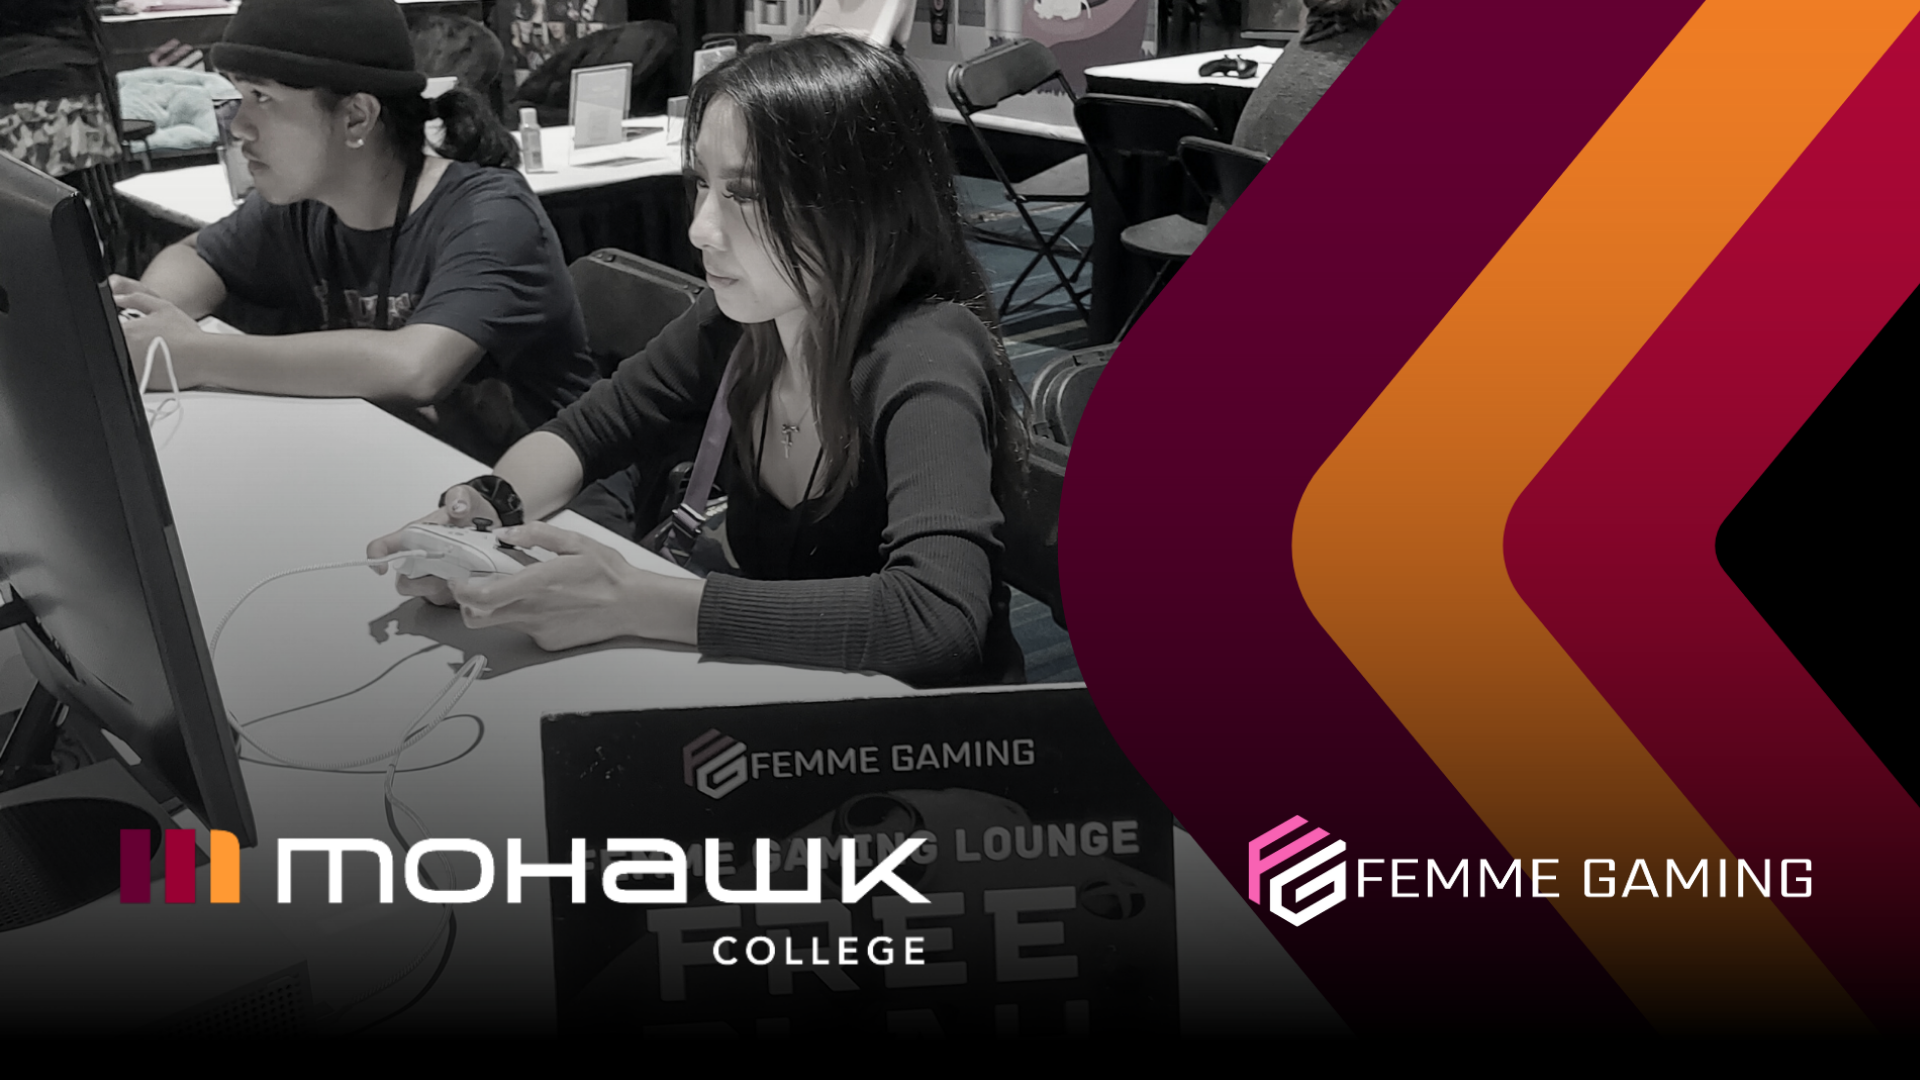 Femme Gaming x Mohawk College